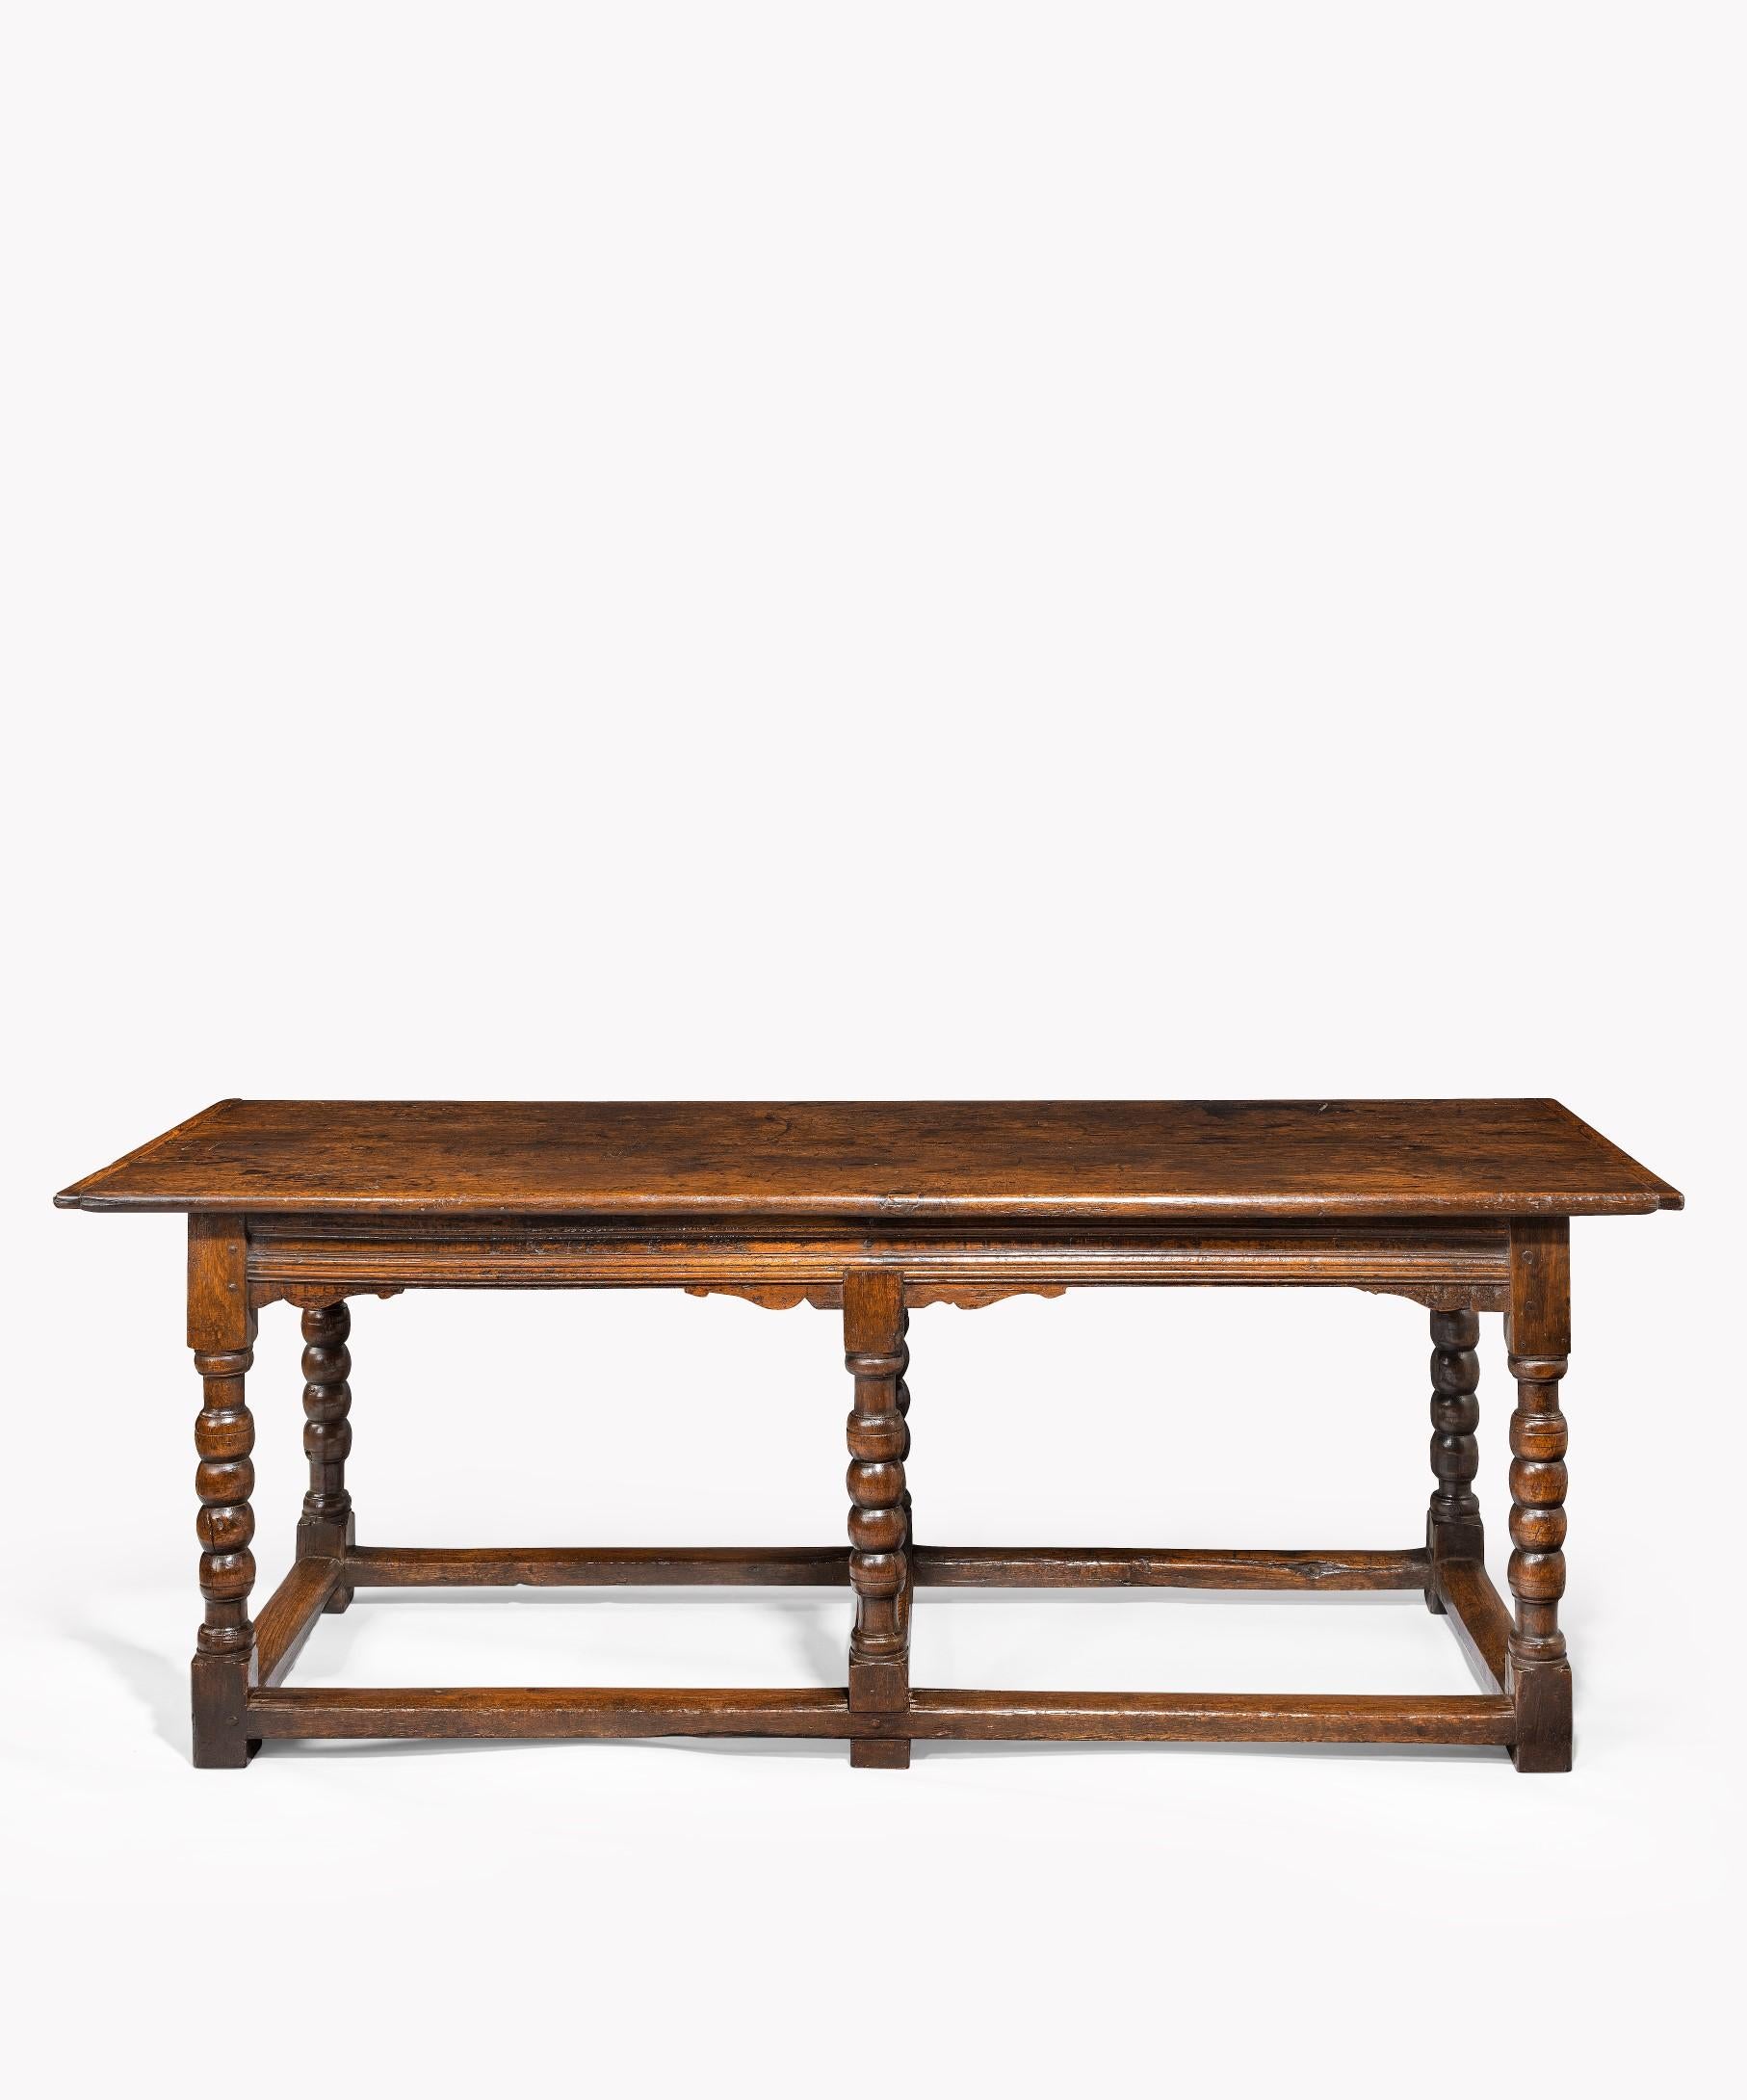 A late 17th century oak hall table; the table's well figured two plank top above a molded frieze in sized with the date 1699 above turned legs united by stretchers. This table retains a superb color and patination and would also make a superb